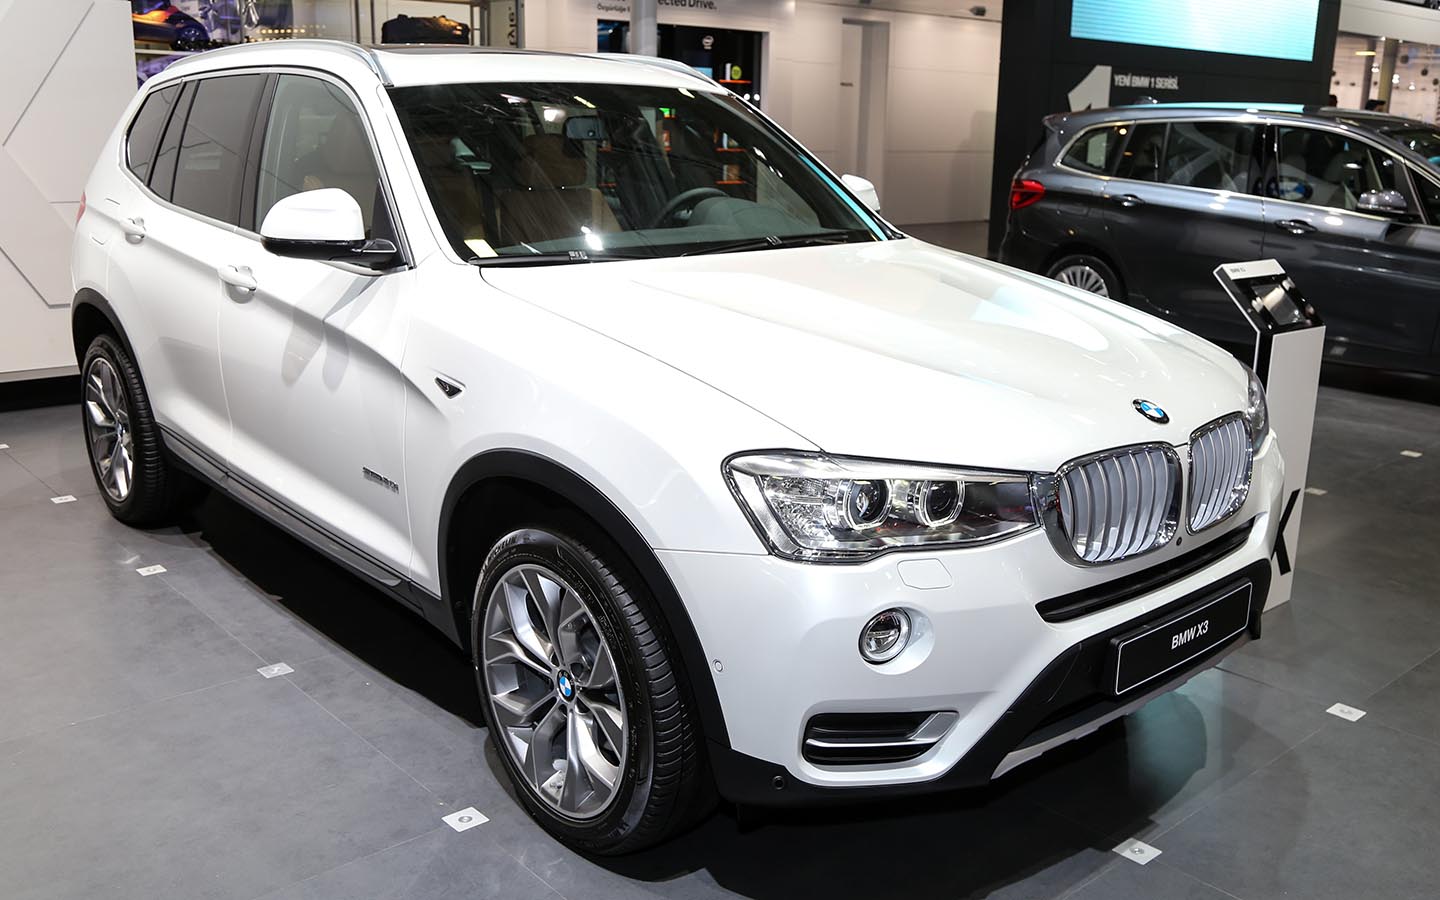 the BMW X3 is a luxury SUV